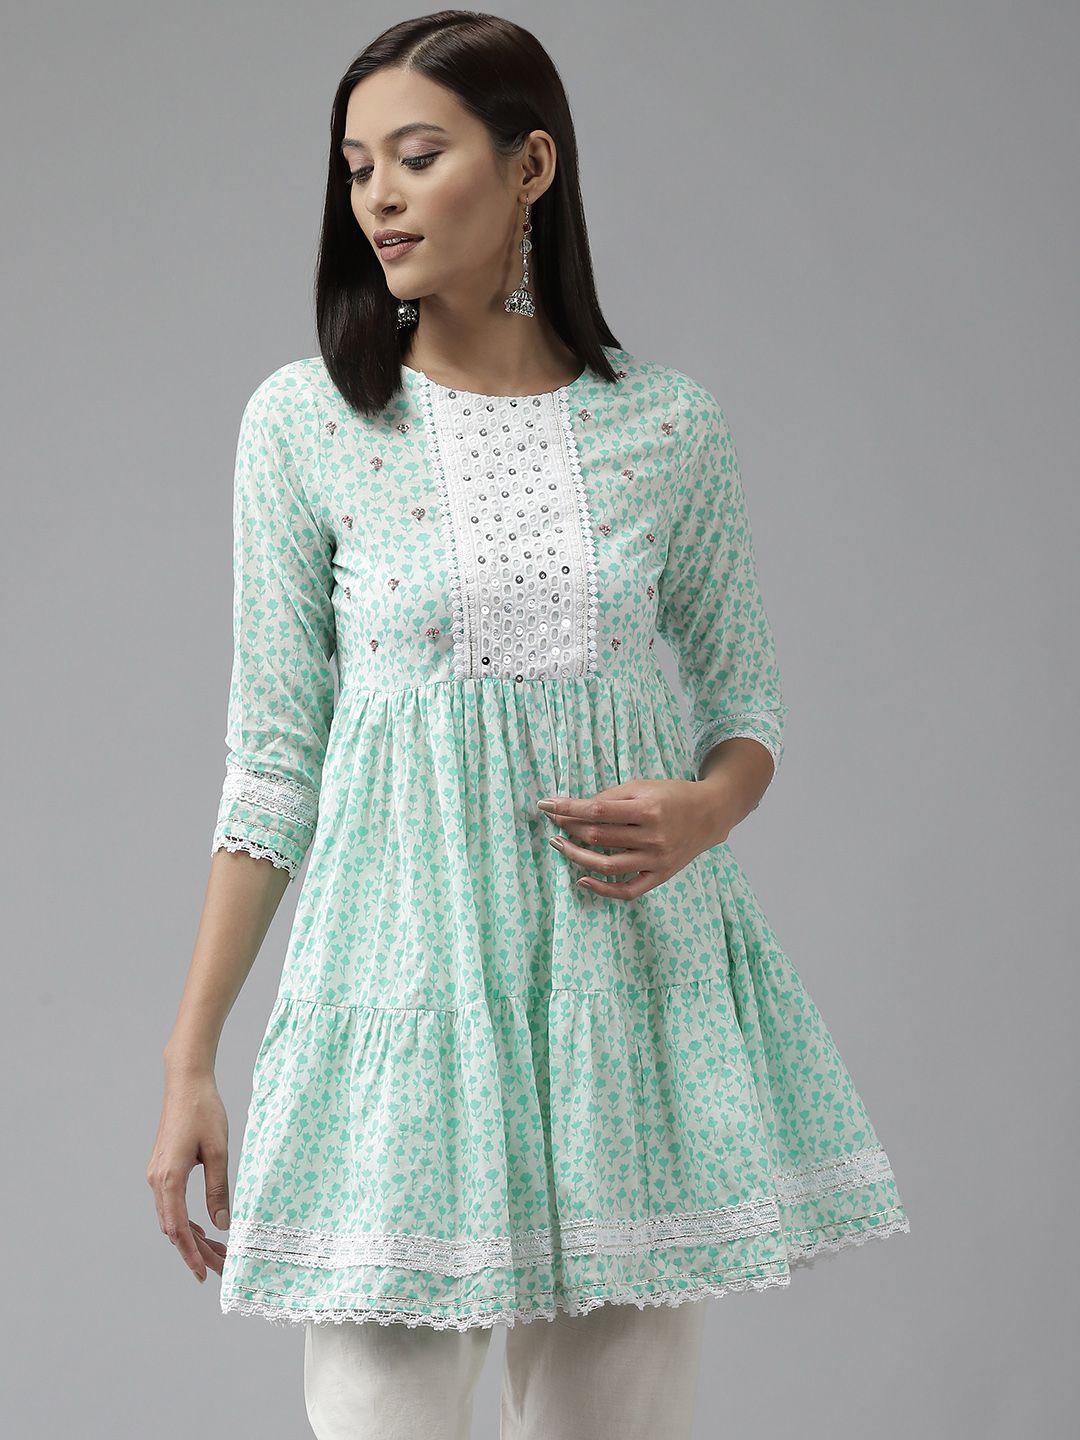 amirah s sea green & white ethnic motifs printed lace inserts pleated pure cotton tunic